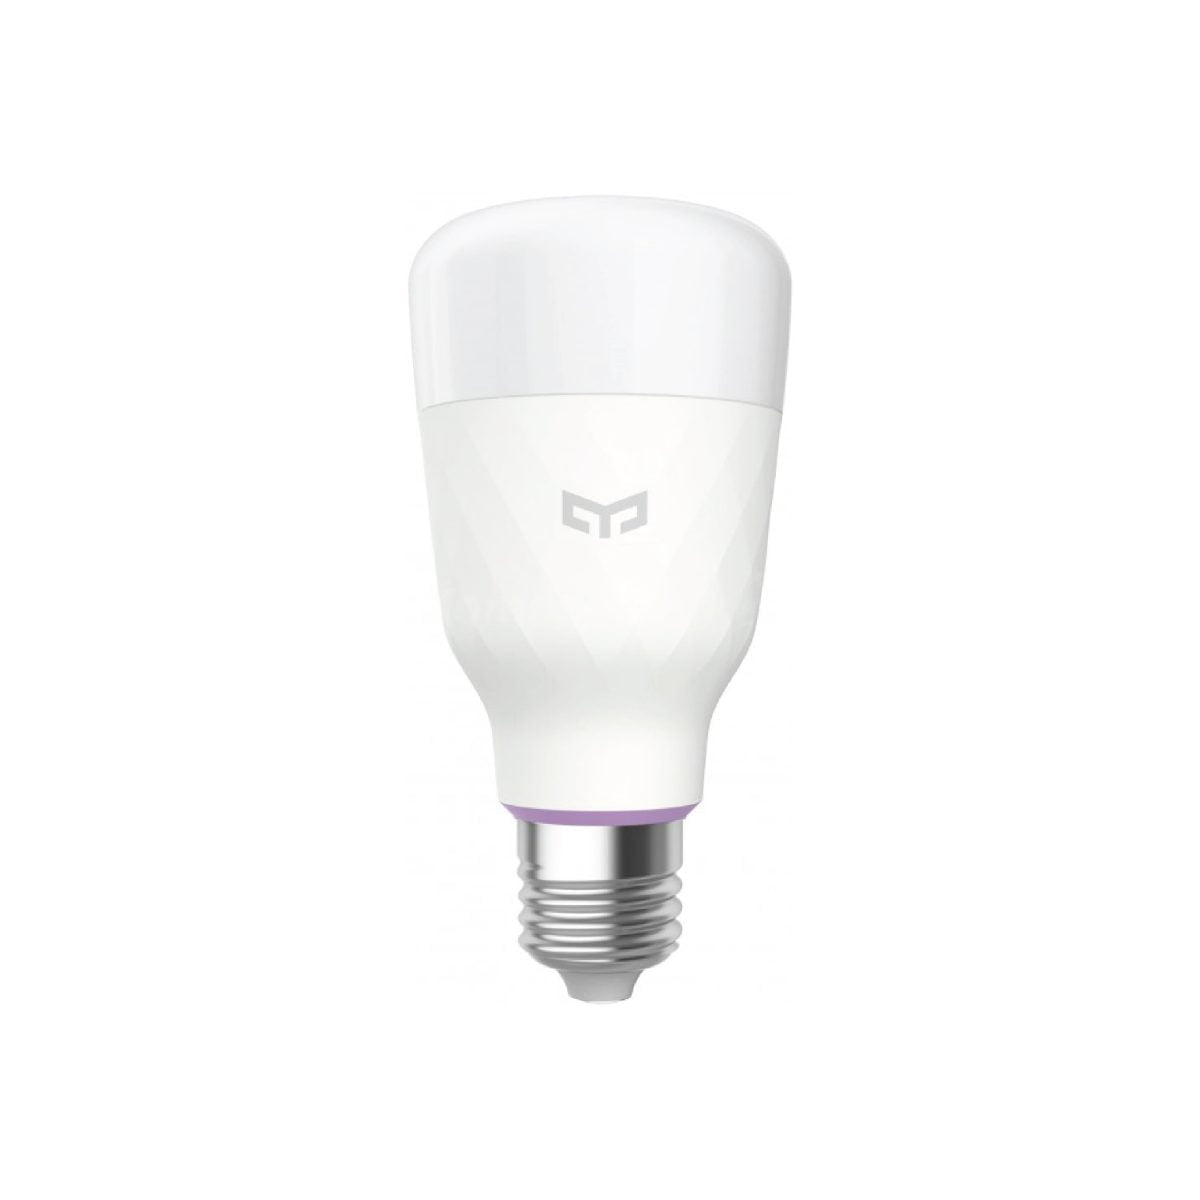 Bulb 26 Xiaomi The Yeelight 1S Rgb Smart Light Bulb Will Allow You To Create Your Own Smart Home. You Can Control It With Your Voice Or Application And Decide With What Temperature And Power It Should Shine. Luminous Flux: 800Lm Color Temperature: 1700K-6500K Lamp Holder: E27 Rated Power: 8.5W &Nbsp; 16 Million Colors Wifi Enabled, Voice Control, App Control, Music Sync &Lt;Img Class=&Quot;Alignnone Wp-Image-8061 Size-Full&Quot; Src=&Quot;Https://Lablaab.com/Wp-Content/Uploads/2020/04/Bulb-27-2-Scaled.jpg&Quot; Alt=&Quot;&Quot; Width=&Quot;2560&Quot; Height=&Quot;357&Quot; /&Gt; &Nbsp; Yeelight Smart Bulb Yeelight Smart Bulb 1S (Color)